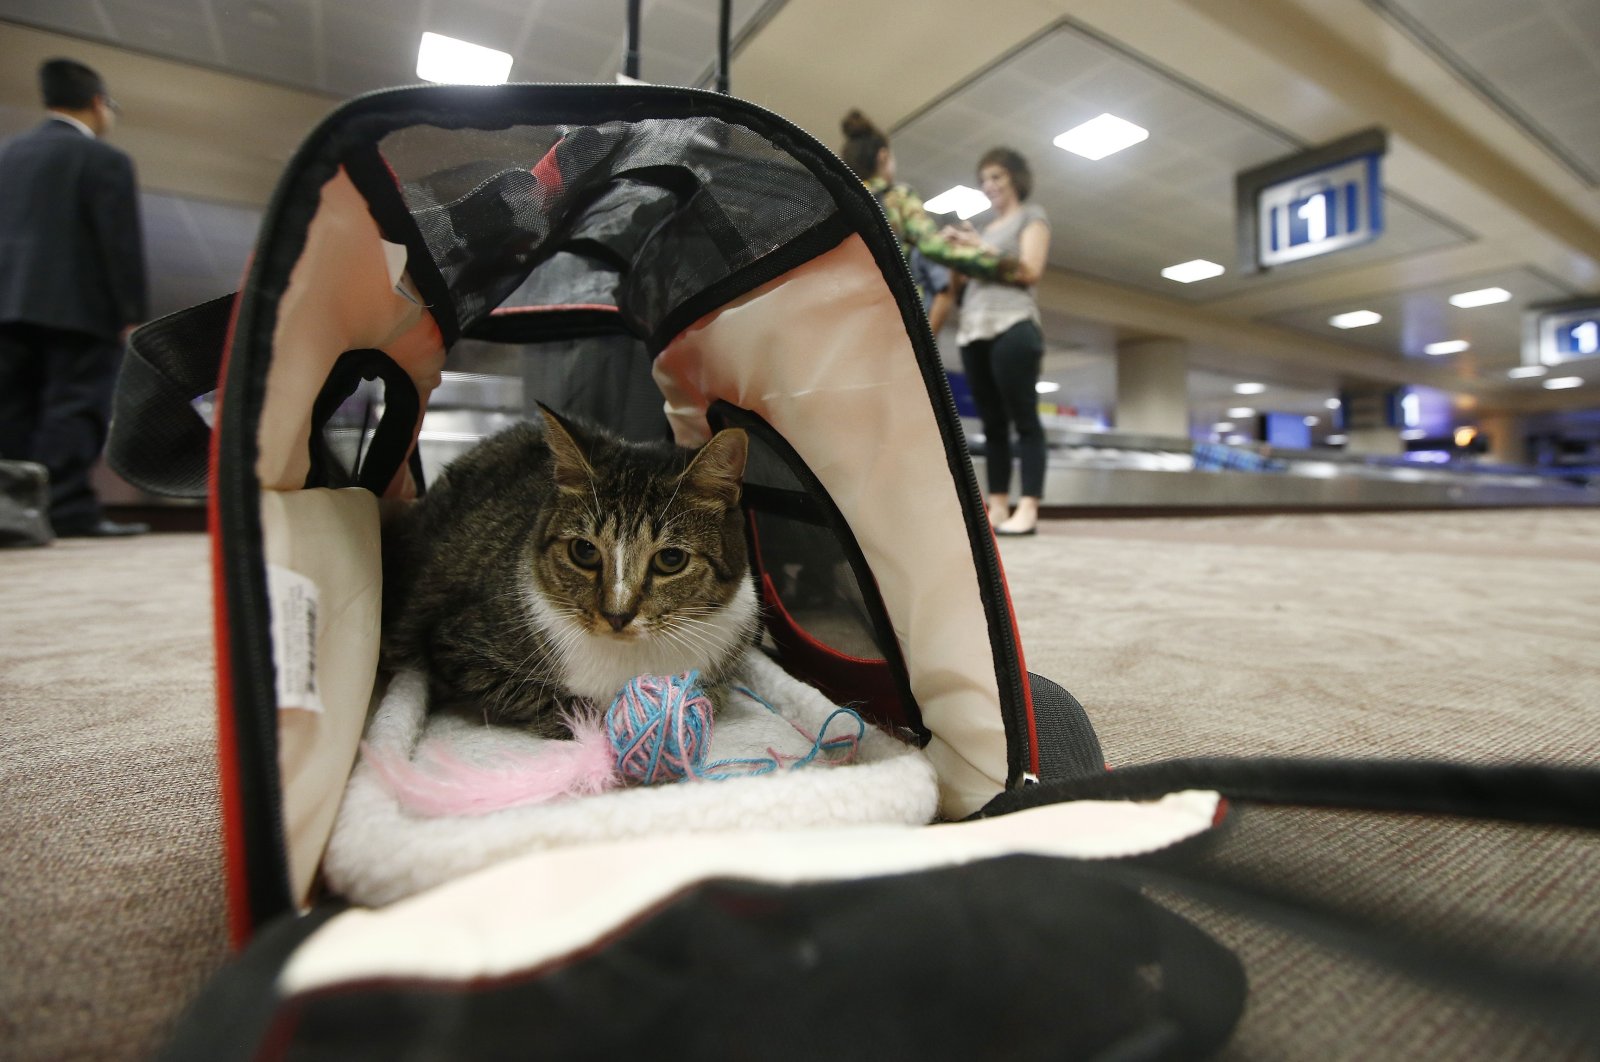 In this file photo, Oscar the cat sits in his carrier after arriving at Phoenix Sky Harbor International Airport in Phoenix, Sept. 20, 2017. (AP Photo)